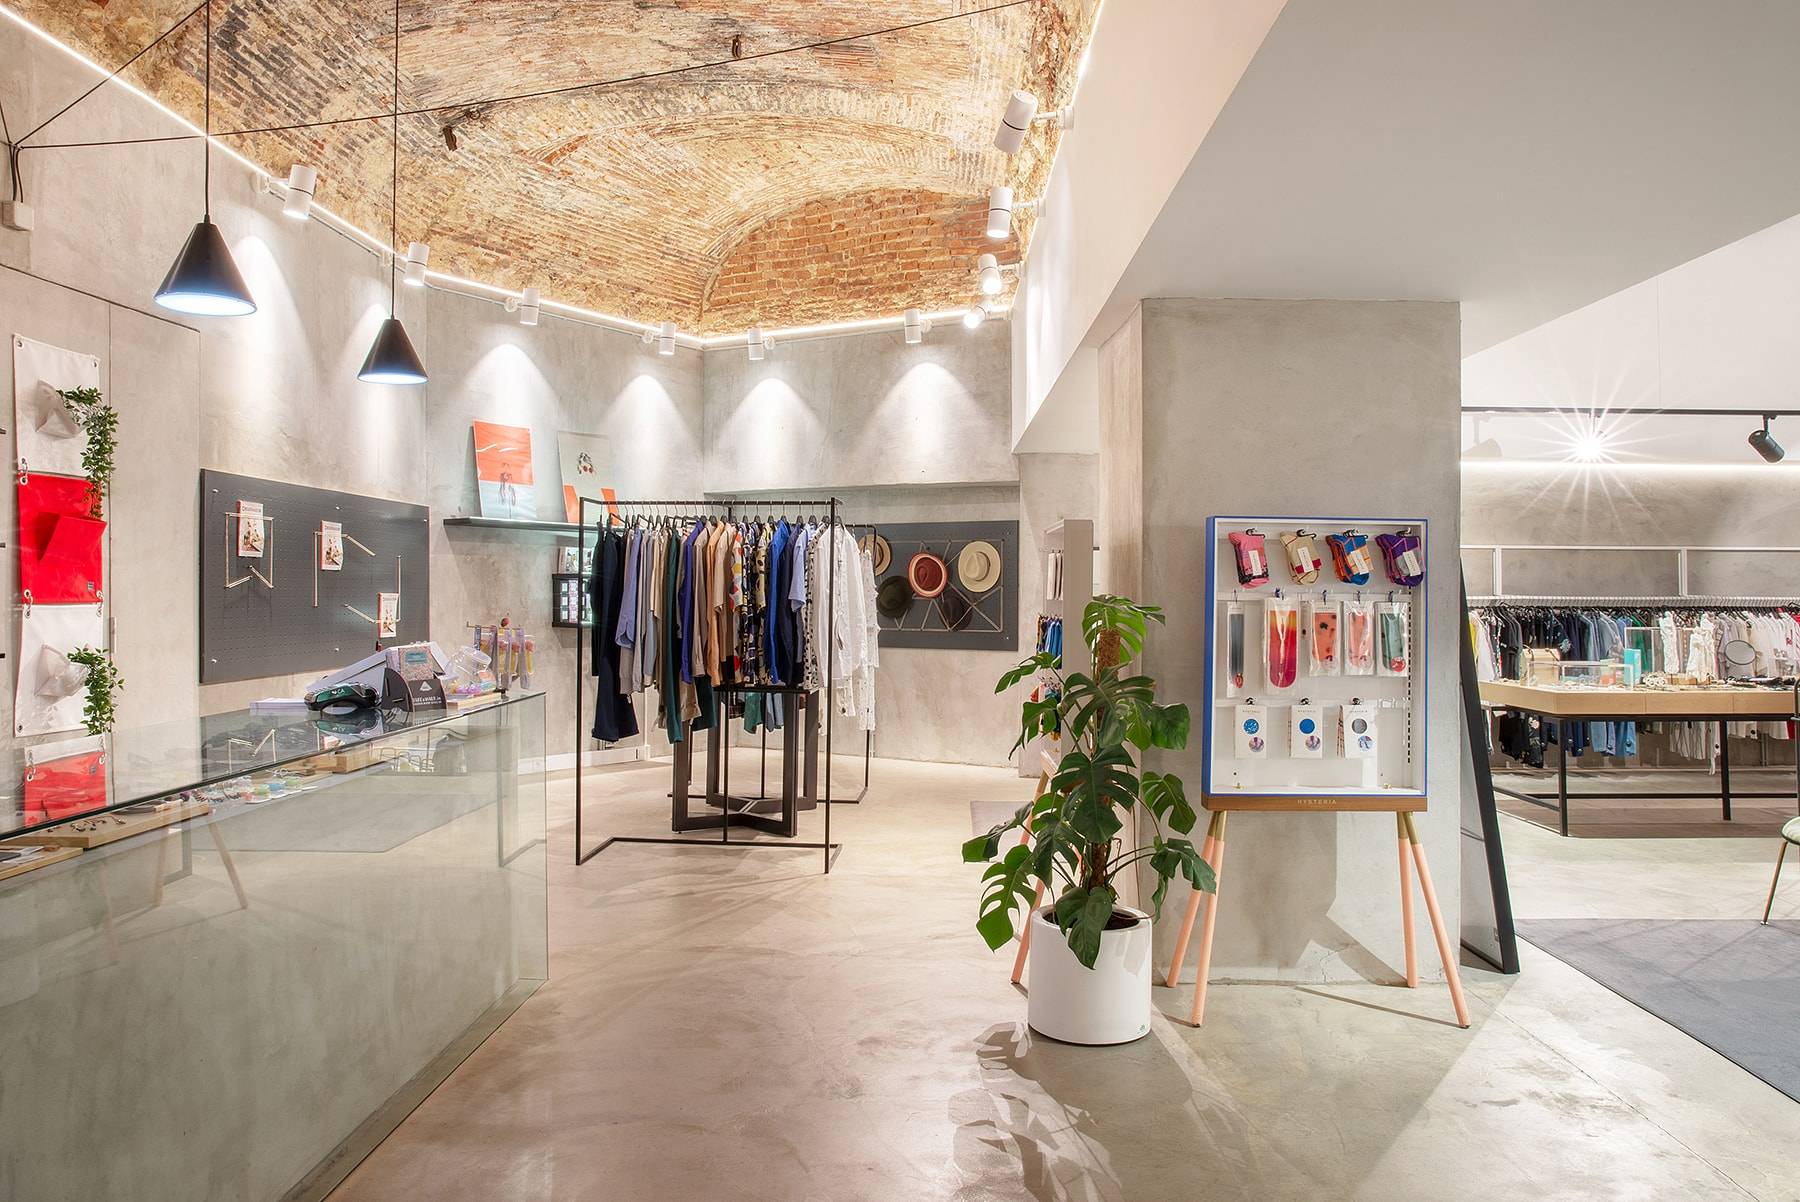 Inside view at The Feeting Room curated concept shop in downtown Lisboa